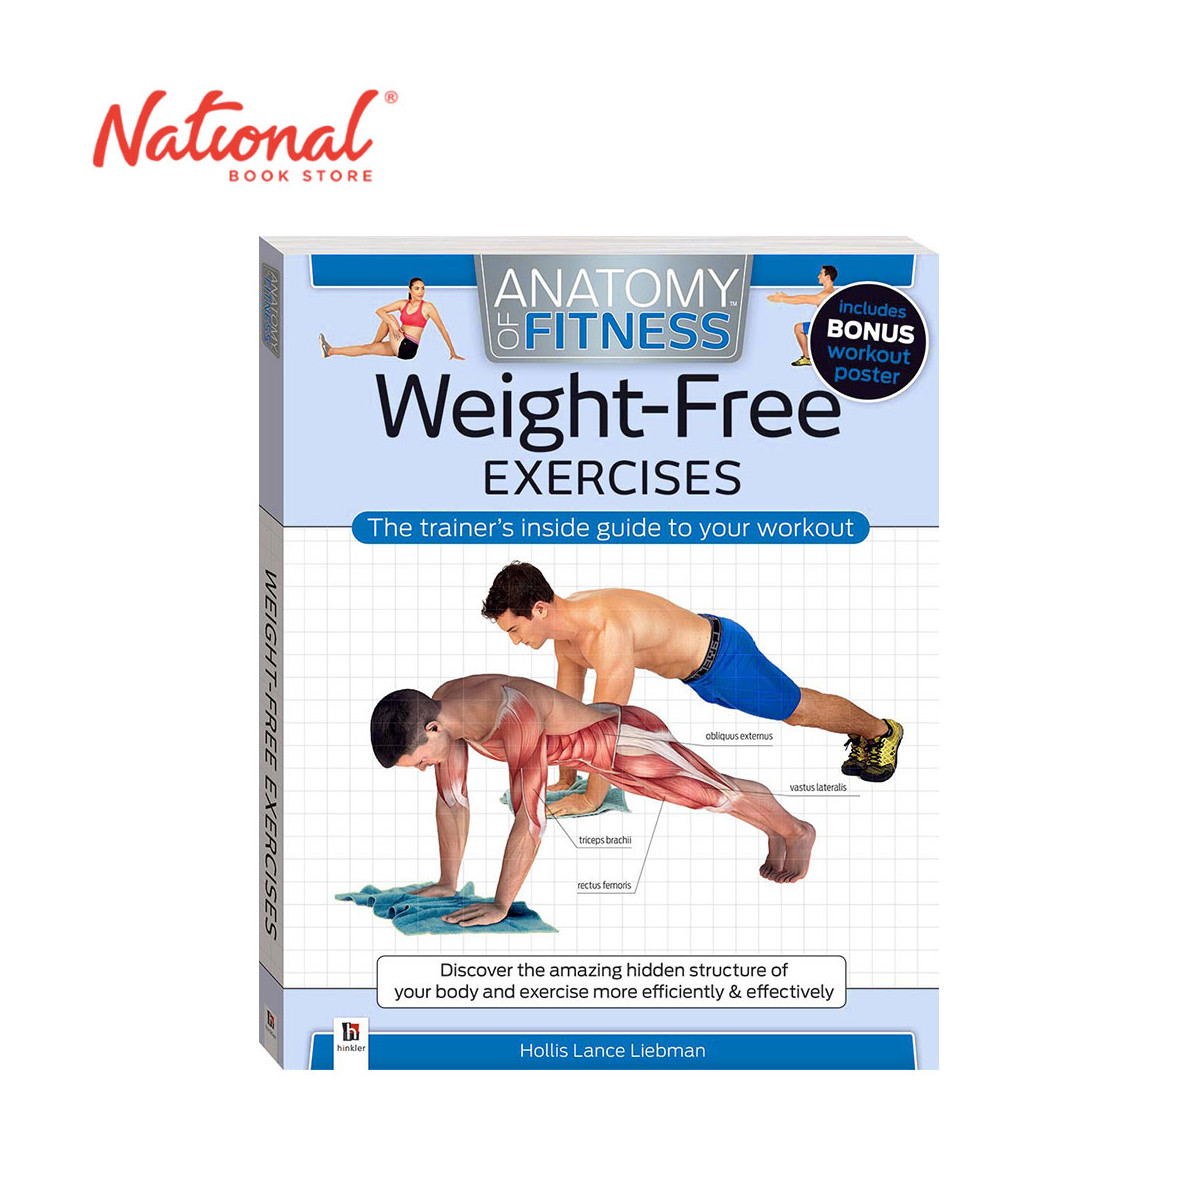 Anatomy of Fitness: Weight-Free Exercises by Hollis Lance Liebman - Trade Paperback - Lifestyle